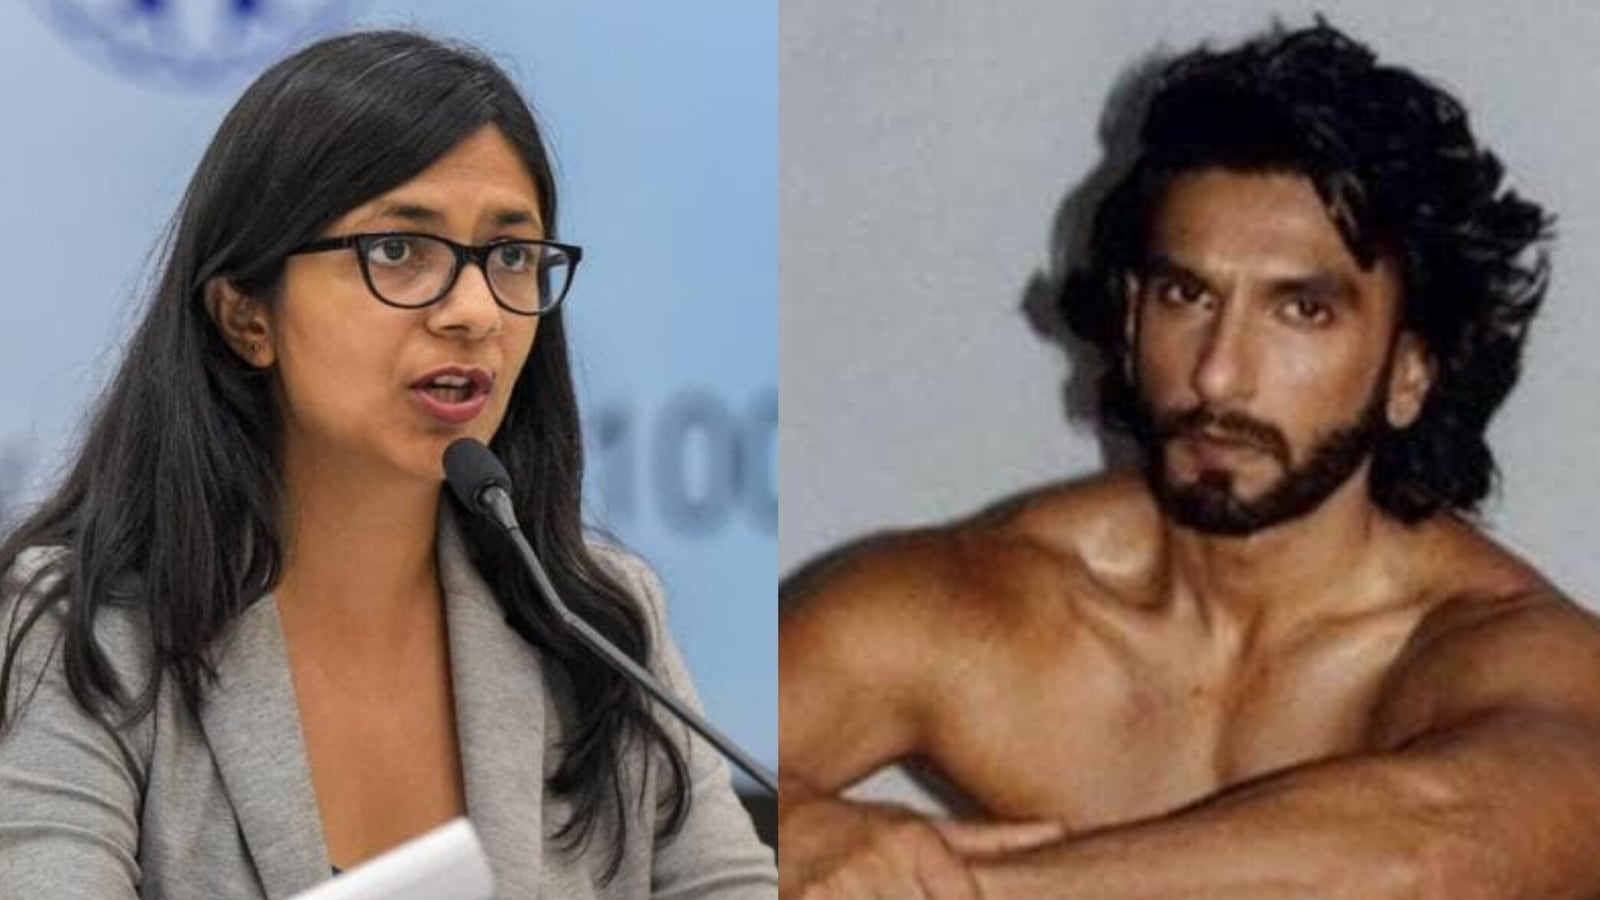 Swati Maliwal on Ranveer Singh's photos: 'No one objects to women's nude  pics' | Bollywood - Hindustan Times